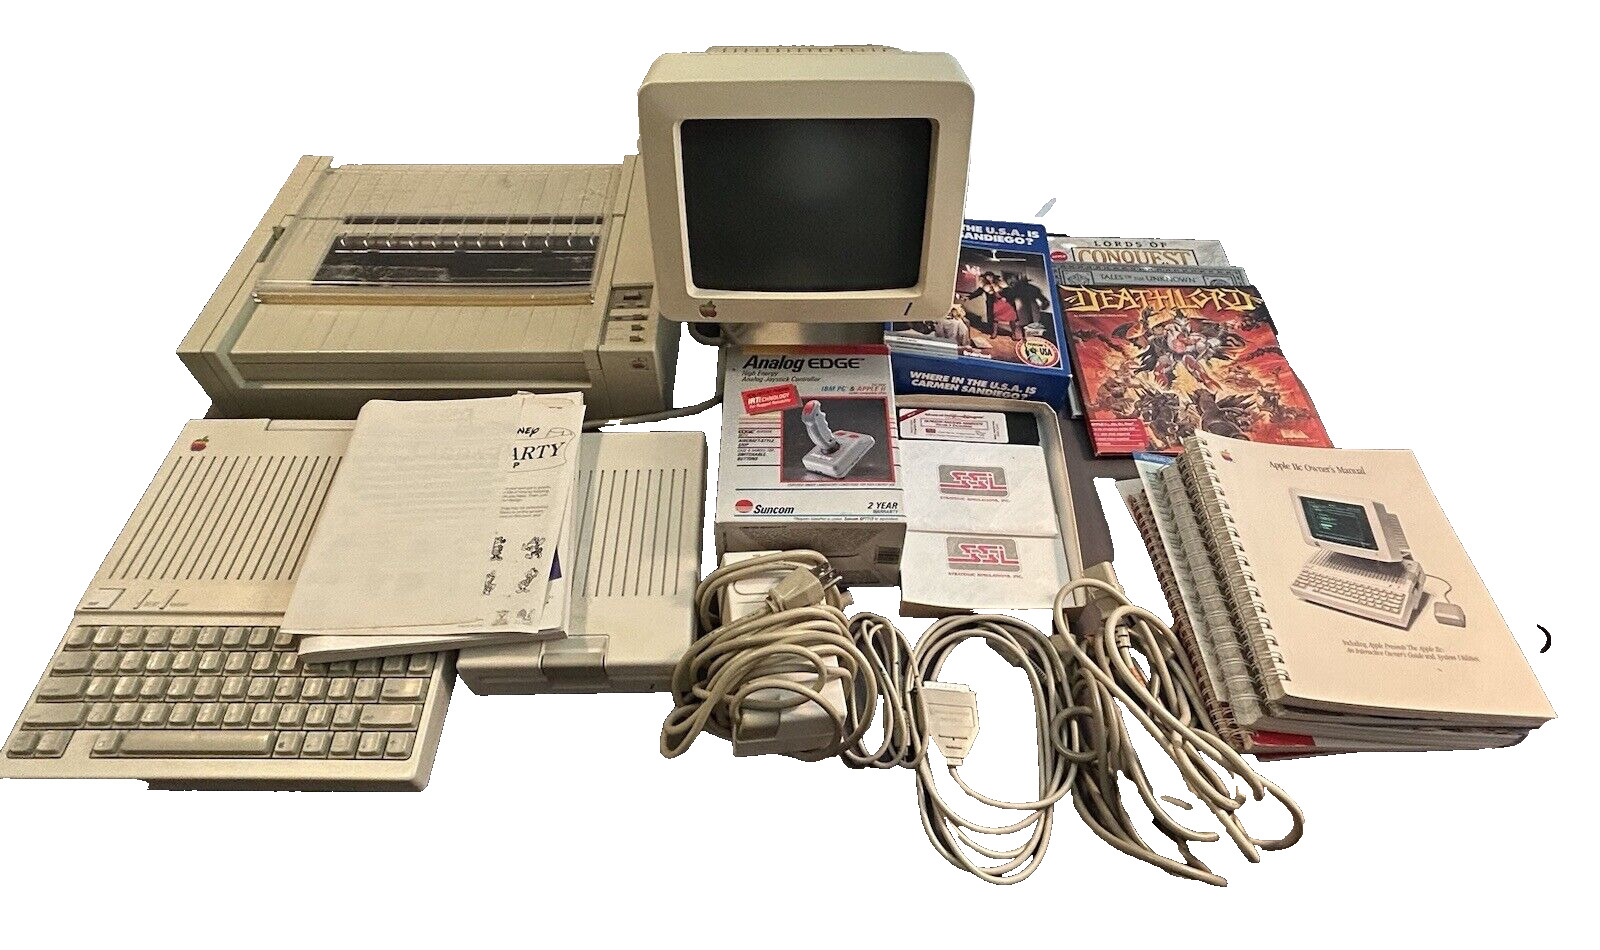 Vintage Apple IIc Computer A2S4000 w/ Monitor, Image Writer, Games, Manuals